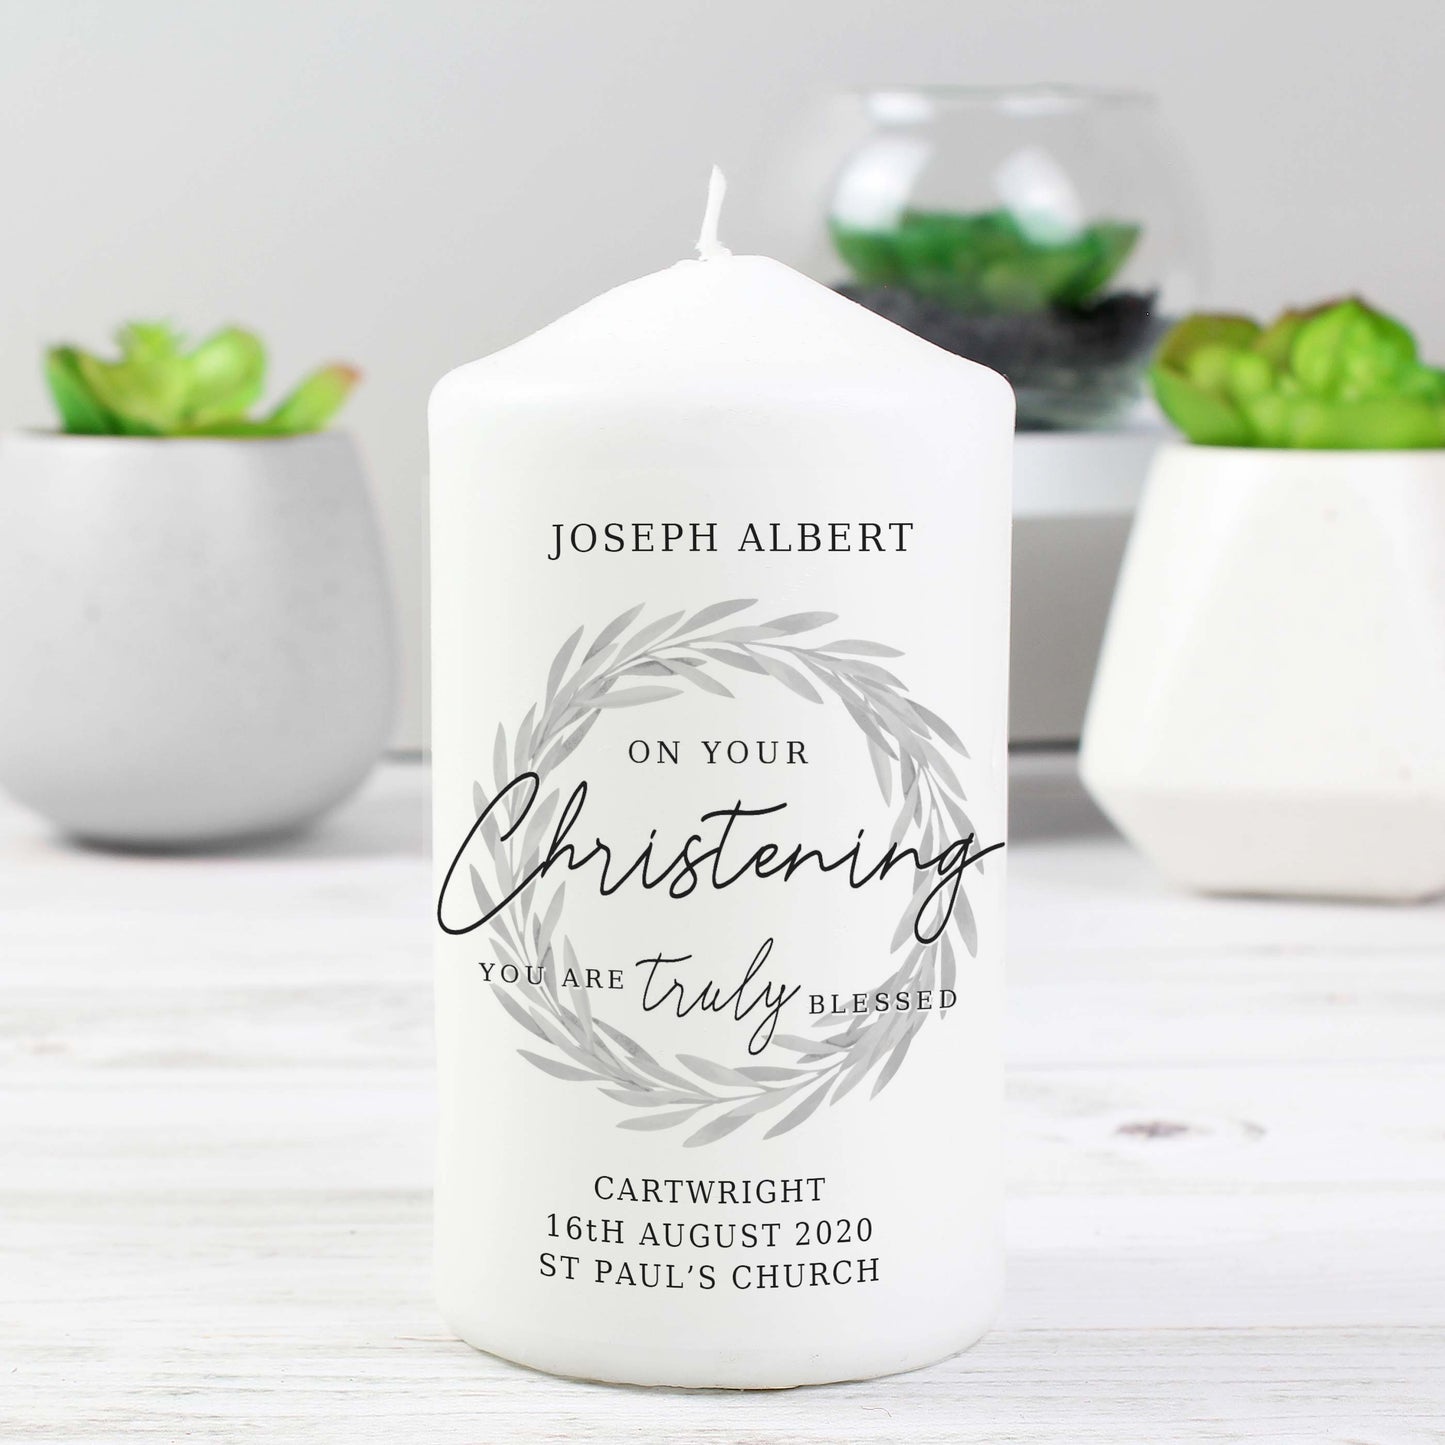 white christening candle which can be personalised with up to four lines of text, including the message "on your christening day you are truly blessed"